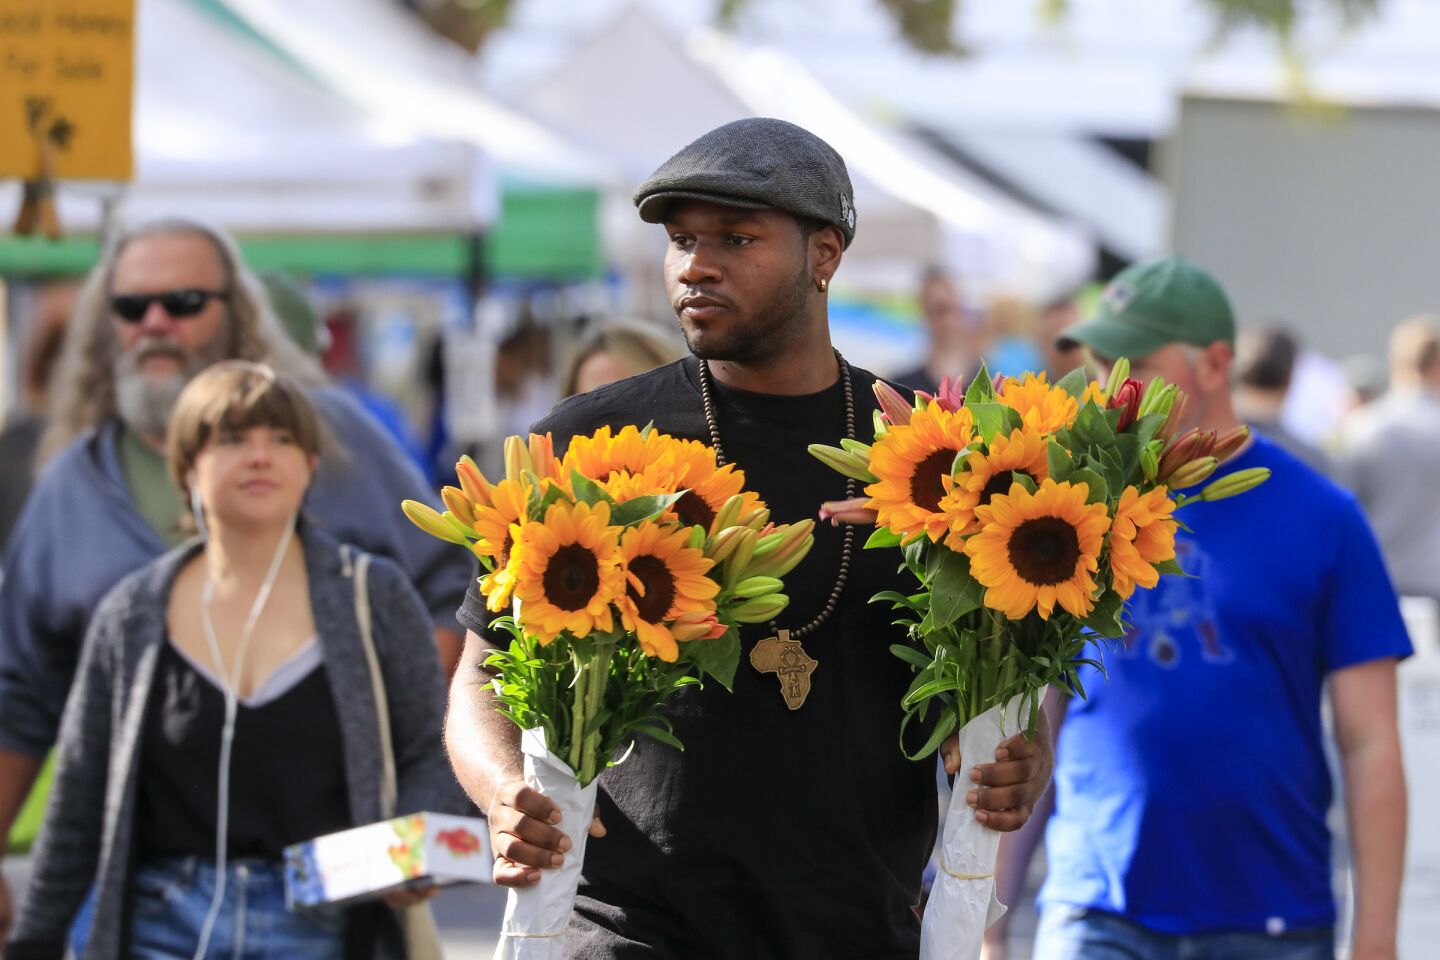 Customer Steven Russell carries two sunflower bouquets through the Claremont Farmers & Artisans Market in the heart of the Claremont Village in the city of Claremont.